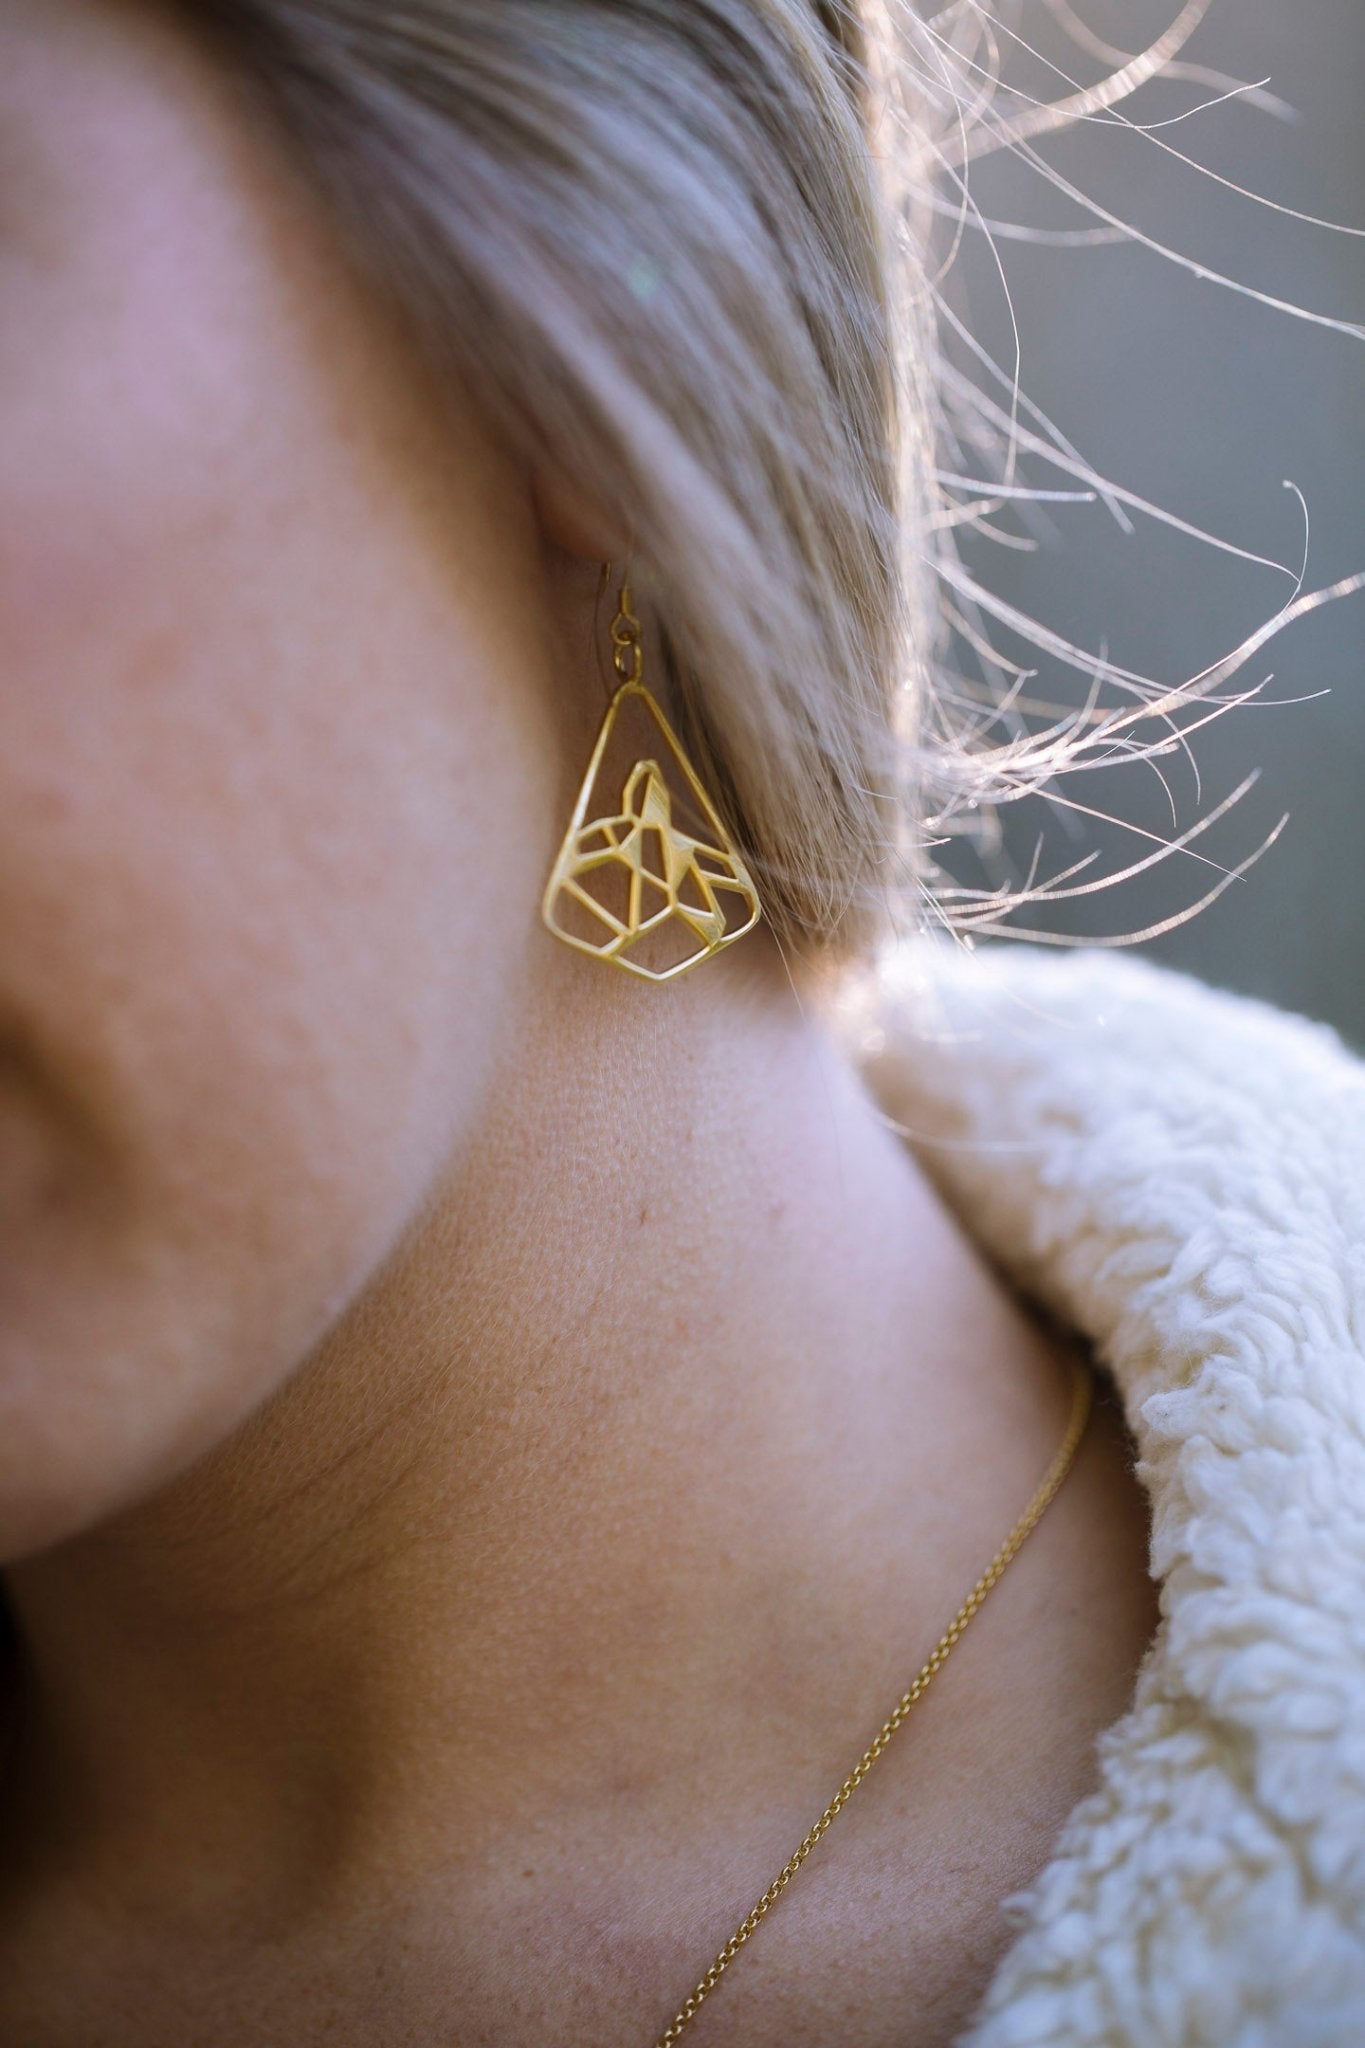 Close up of our black tusk earring in gold. A geometric representation of the icon black tusk peak  inside a diamond shape